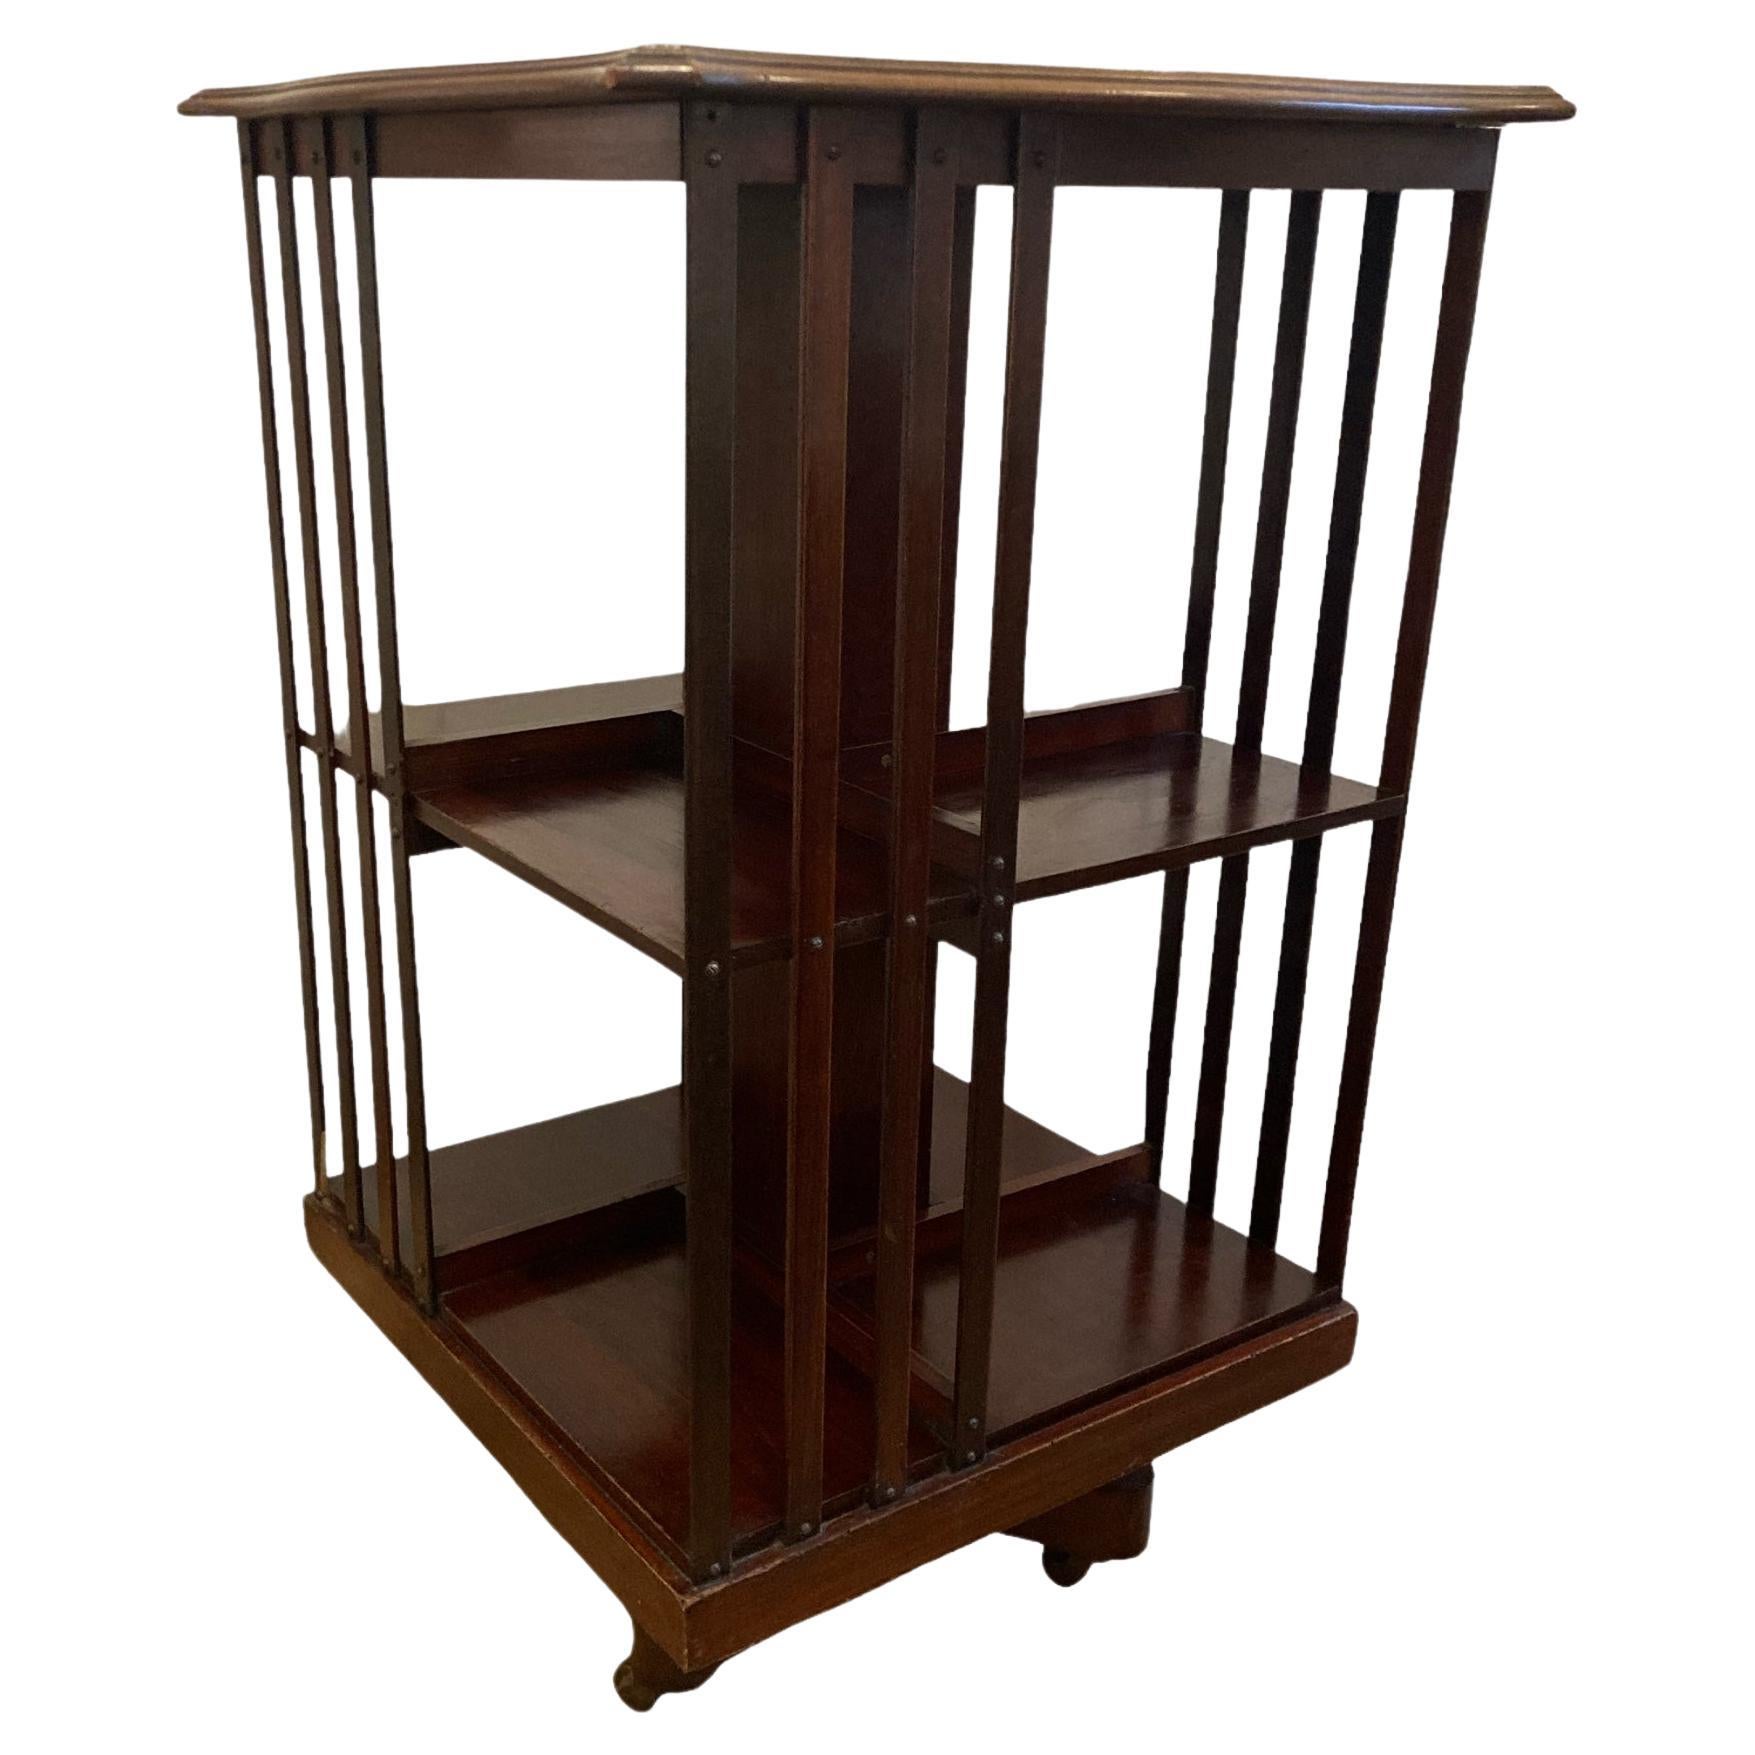 Edwardian Mahogany revolving Bookcase on casters and slatted supports.